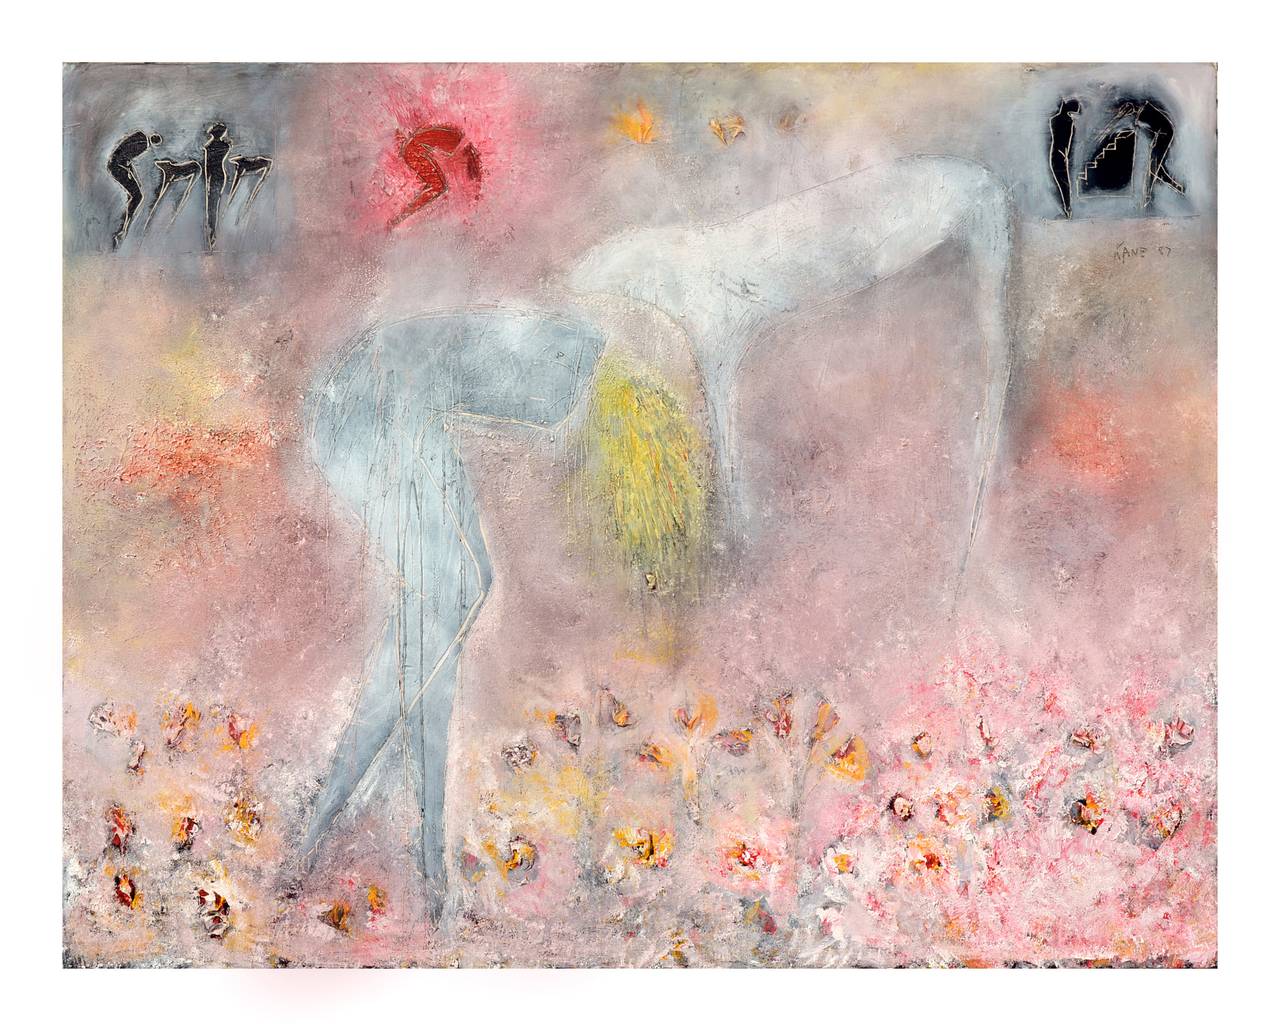 Woman, Dog & Spring Flowers, Large Scale Figurative Abstract with Petroglyphs 